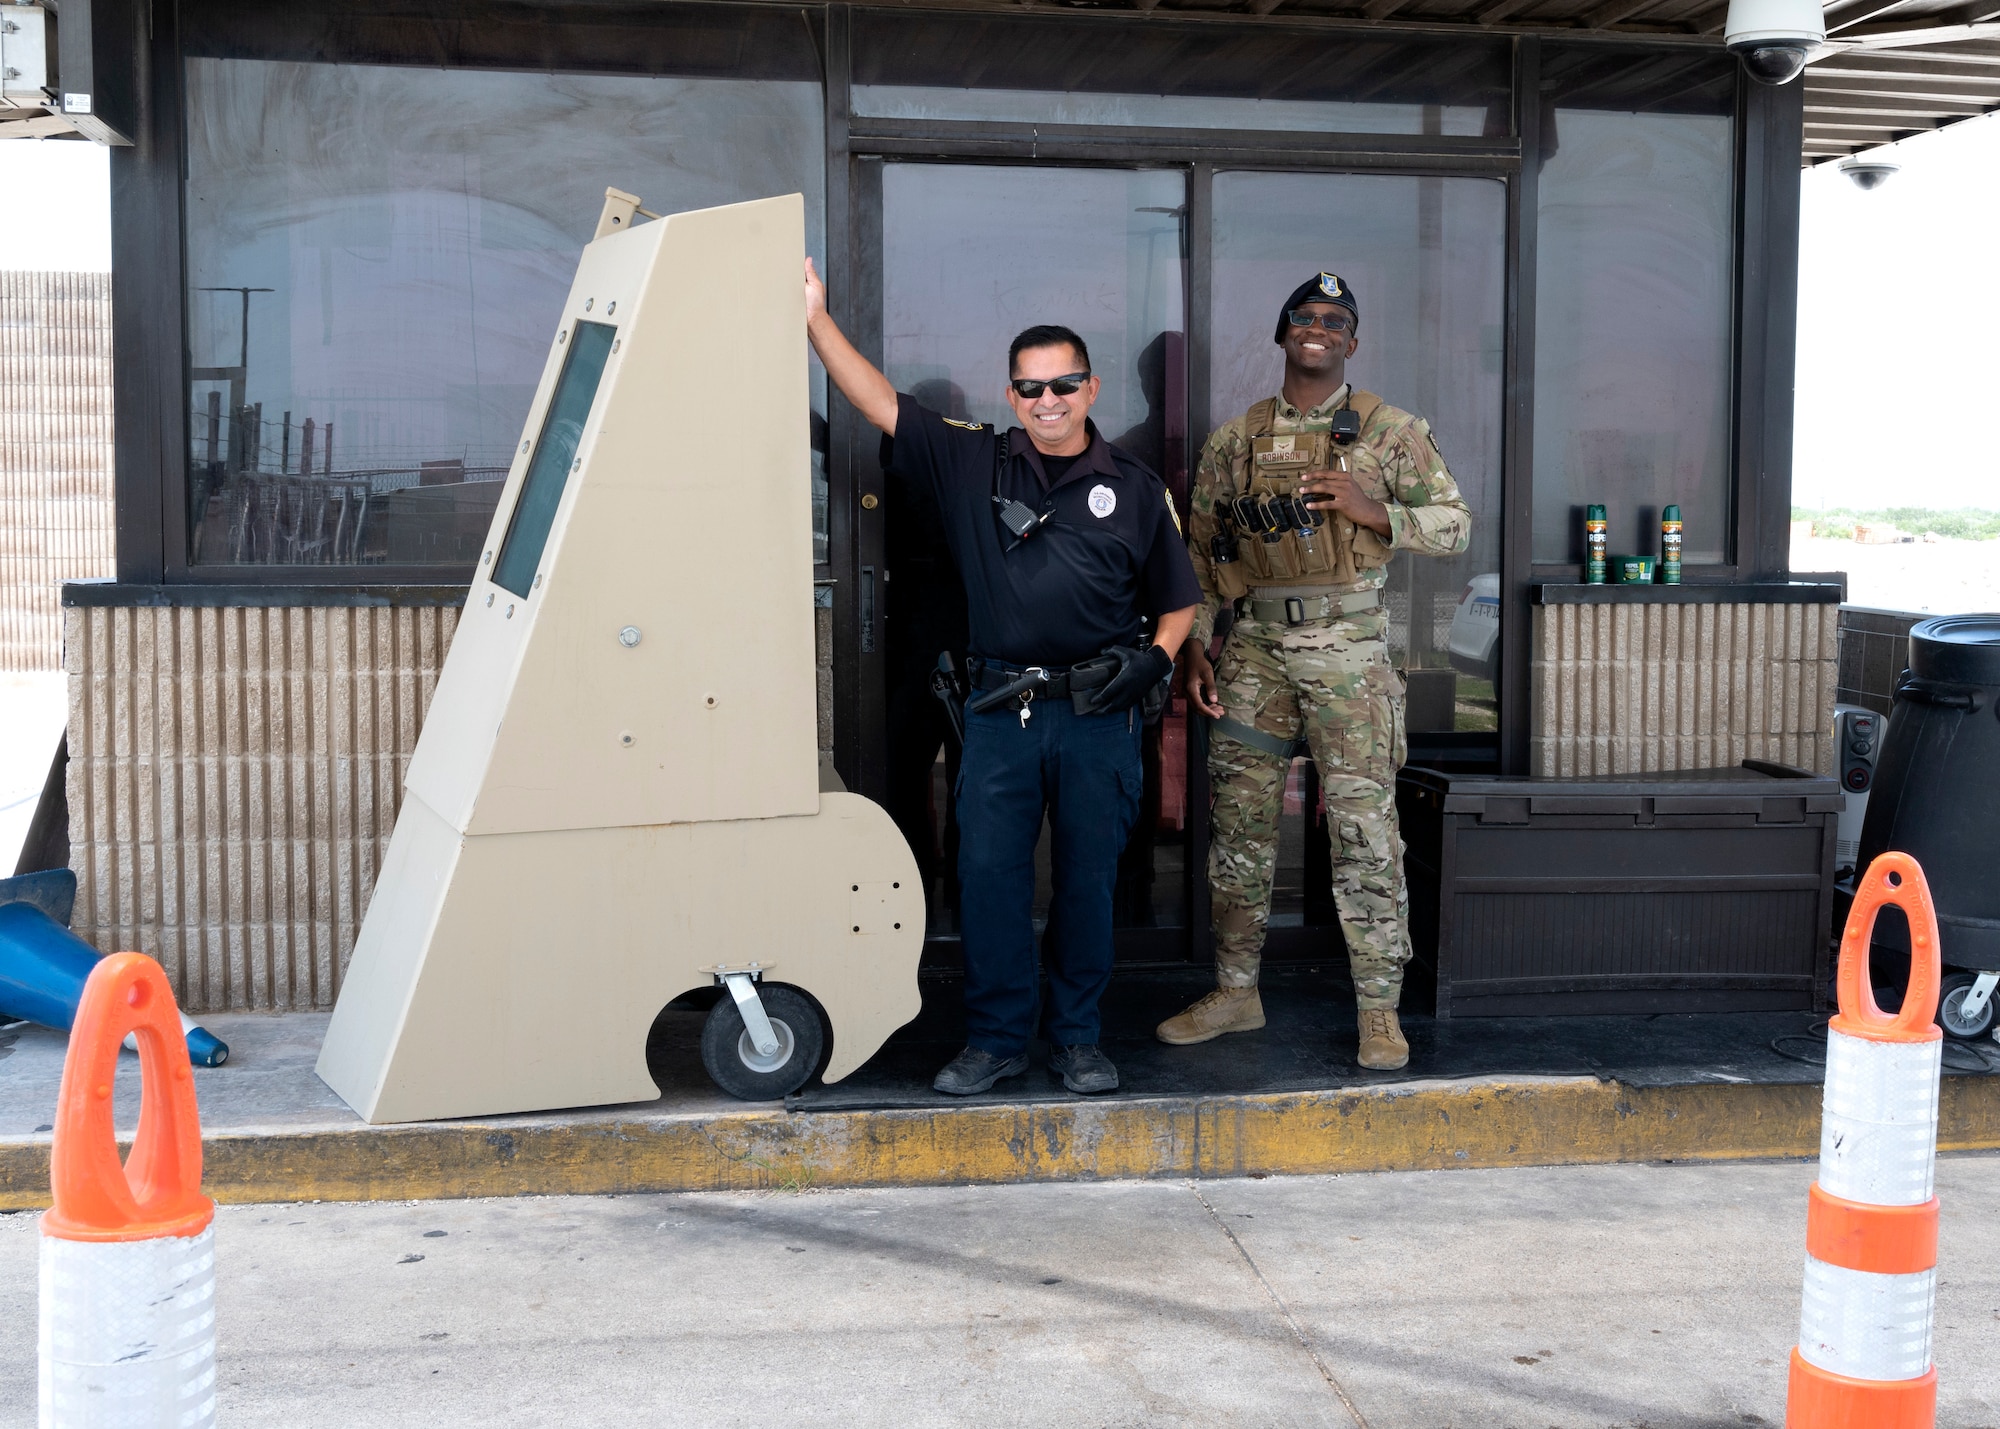 Security Forces personnel at the west gate pose for a photo behind a barrier at Laughlin Air Force Base, July 15, 2021. The Security Forces Personel will be changing the point of entry on July 17, 2021, to allow for upgrades to be completed to the west gate. (U.S. Air Force Photo by Senior Airman Nicholas Larsen)